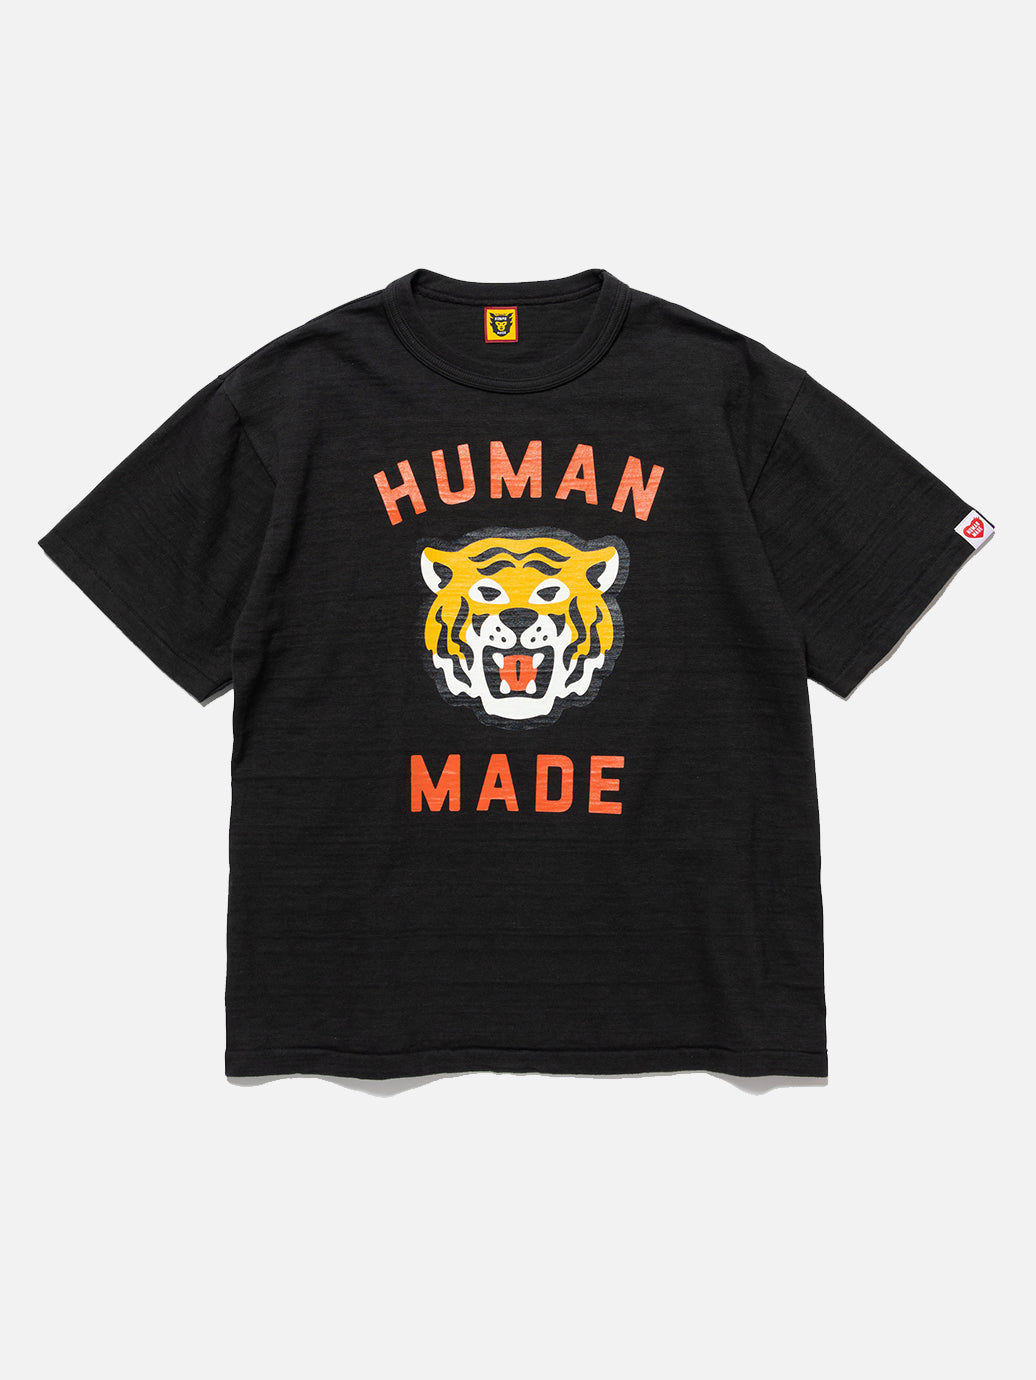 Human Made Graphic T-Shirt #05 – OALLERY